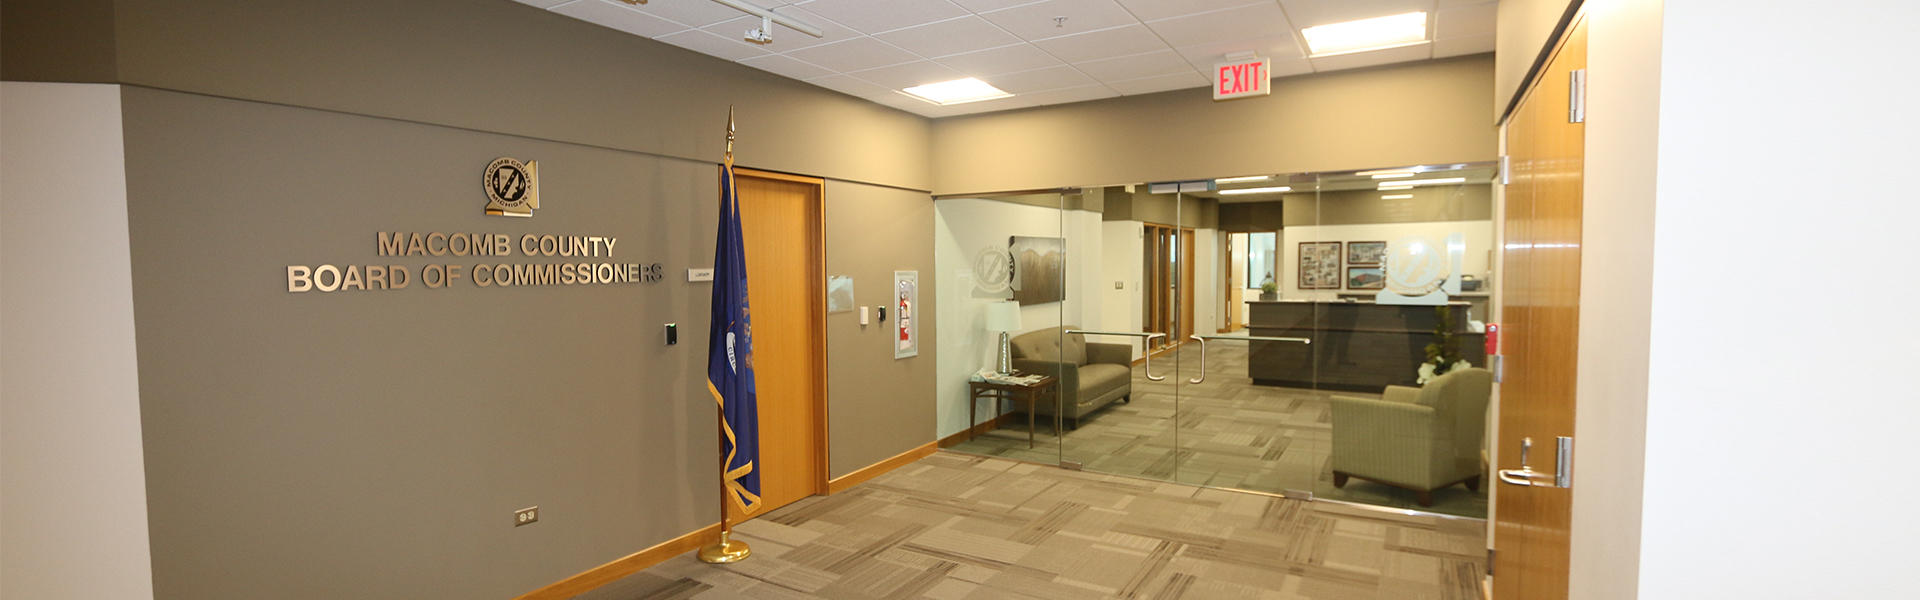 Interior of Macomb County Board of Commissioners lobby.